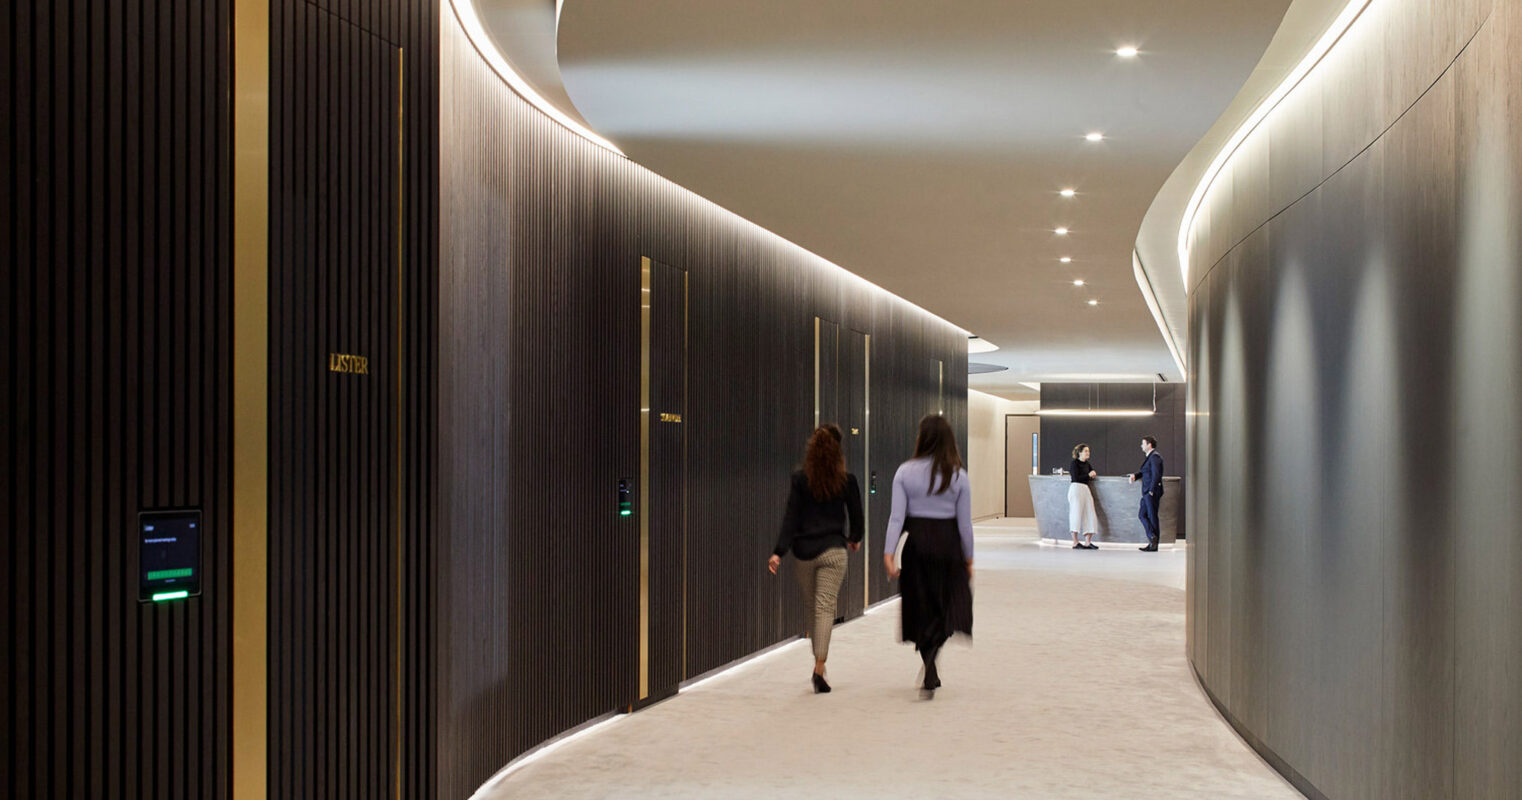 Curved hallway in a modern building with wood-paneled walls and recessed lighting, leading to a bright, open space where several individuals congregate.